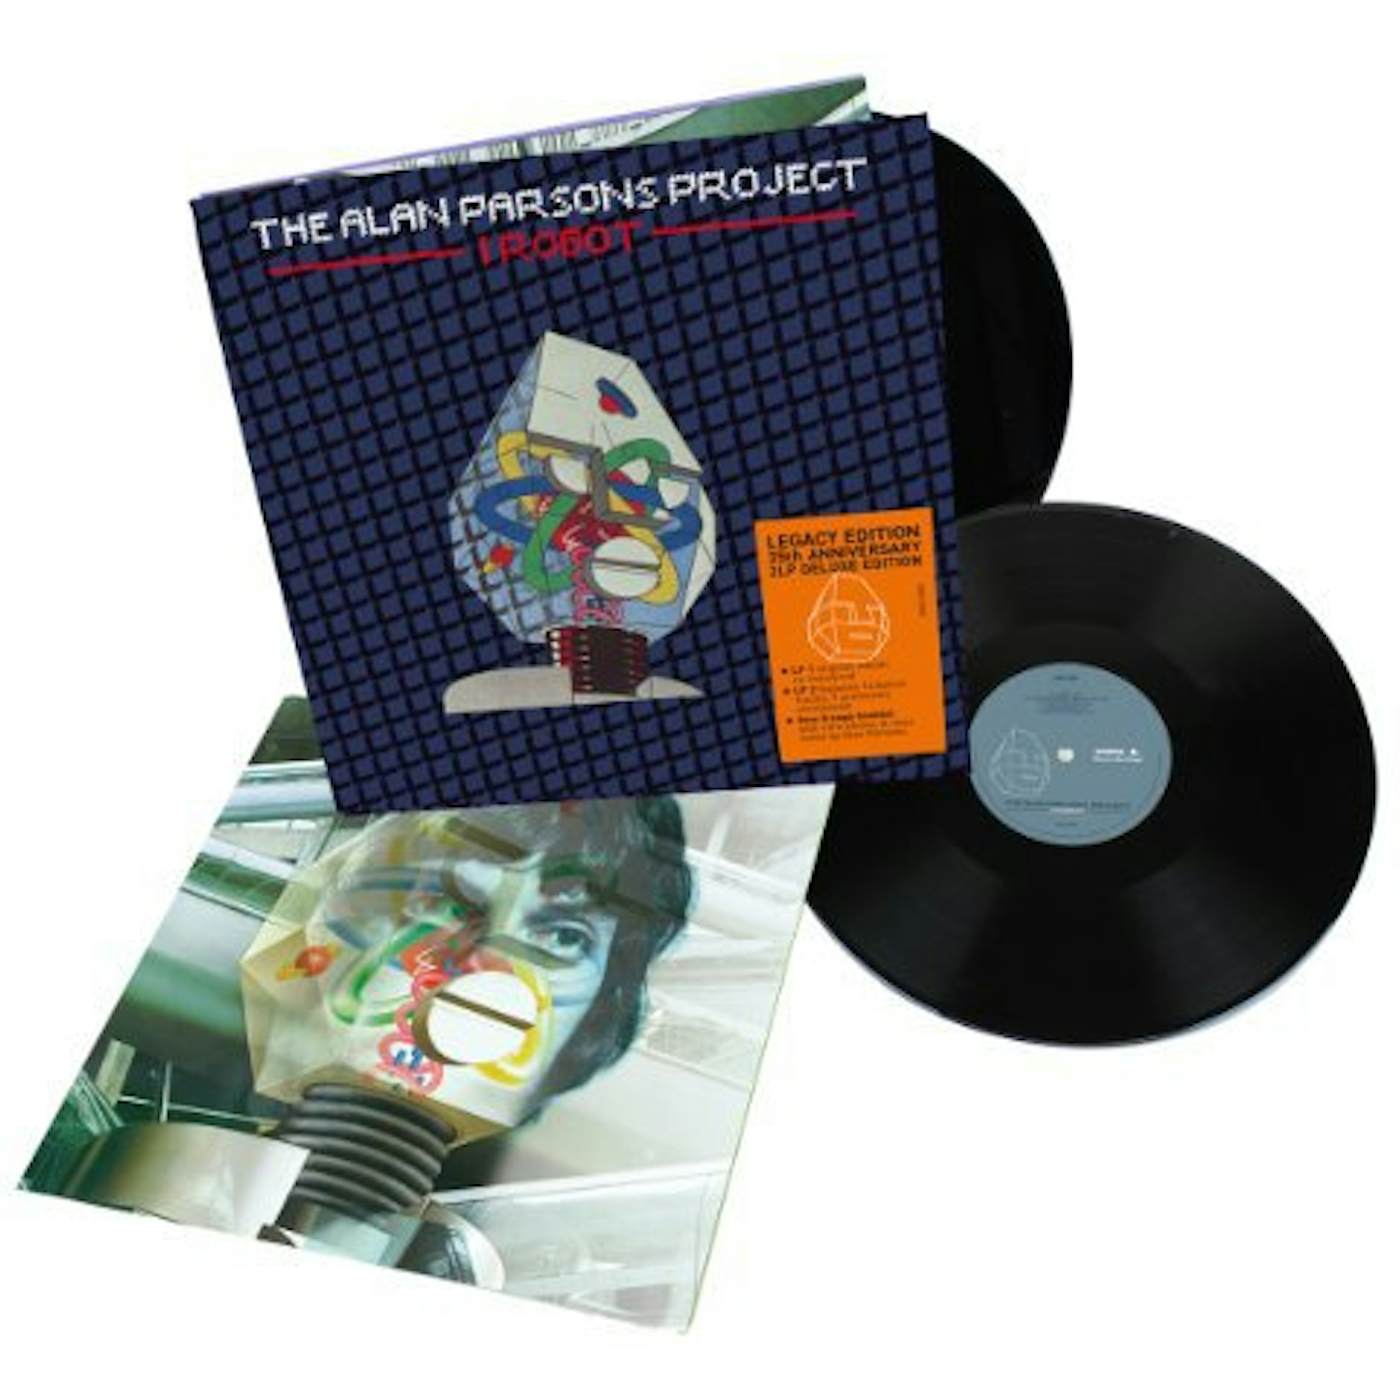 The Alan Parsons Project I ROBOT (LEGACY EDITION) (180G) Vinyl Record